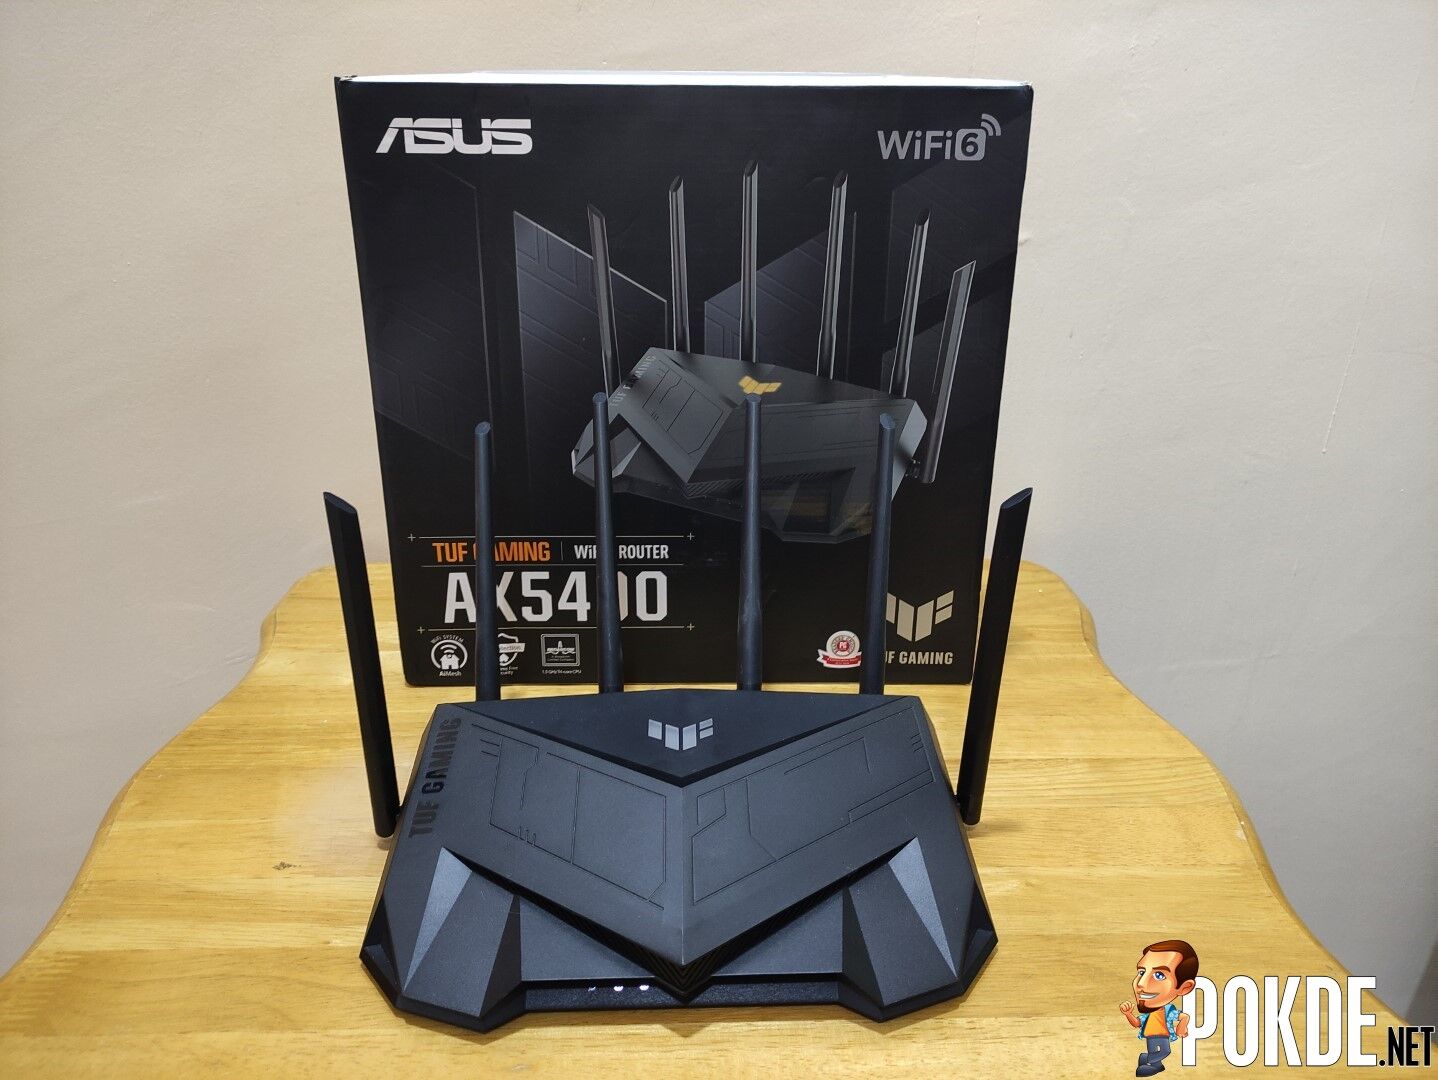 ASUS TUF Gaming AX5400 Router Review - Budget Friendly Router For Your Gaming Needs 19